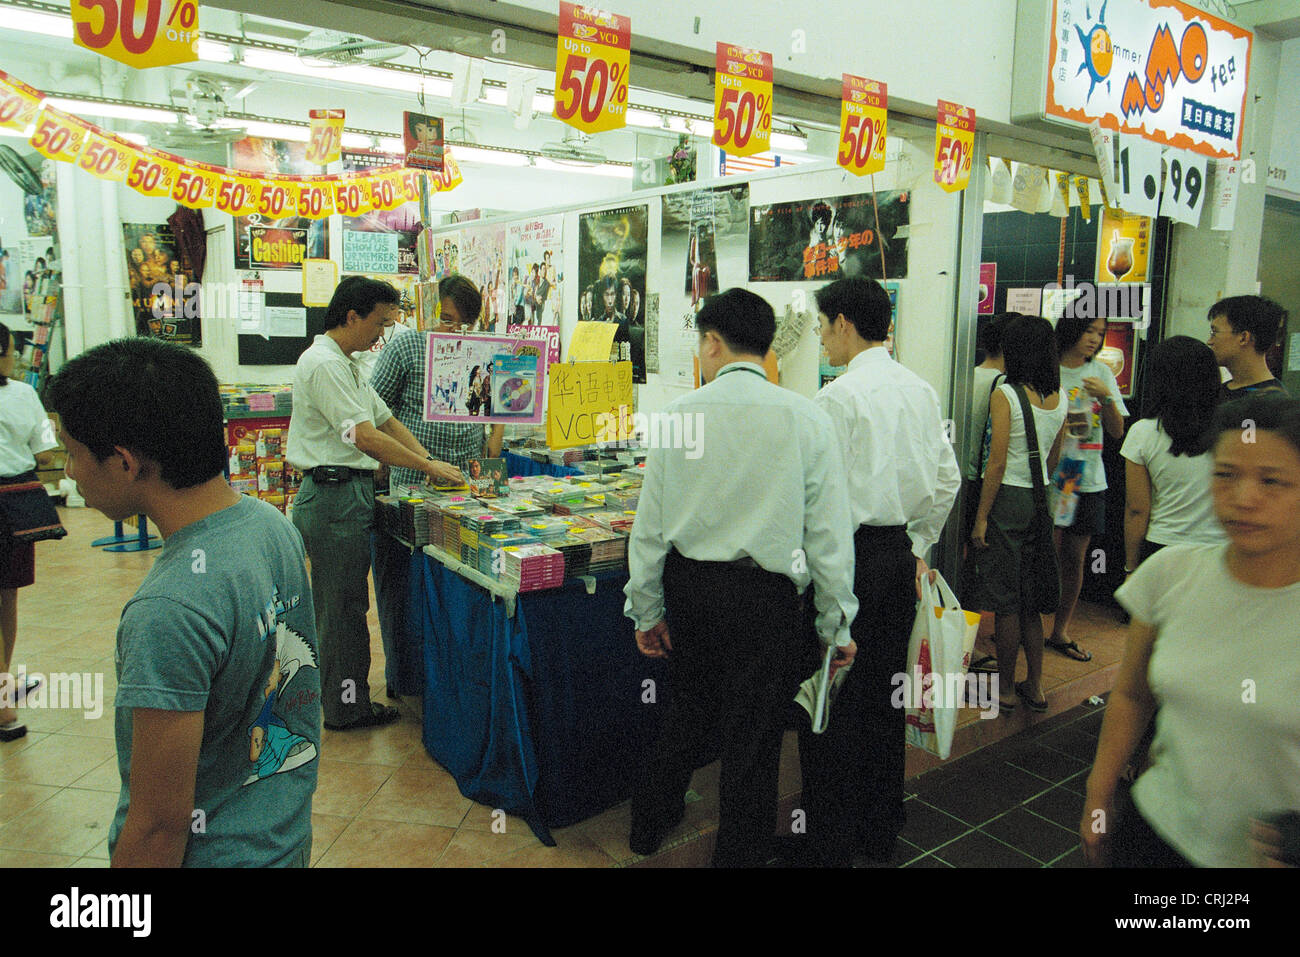 Customers at the counters with music CDs and video cassettes in Singapore Stock Photo